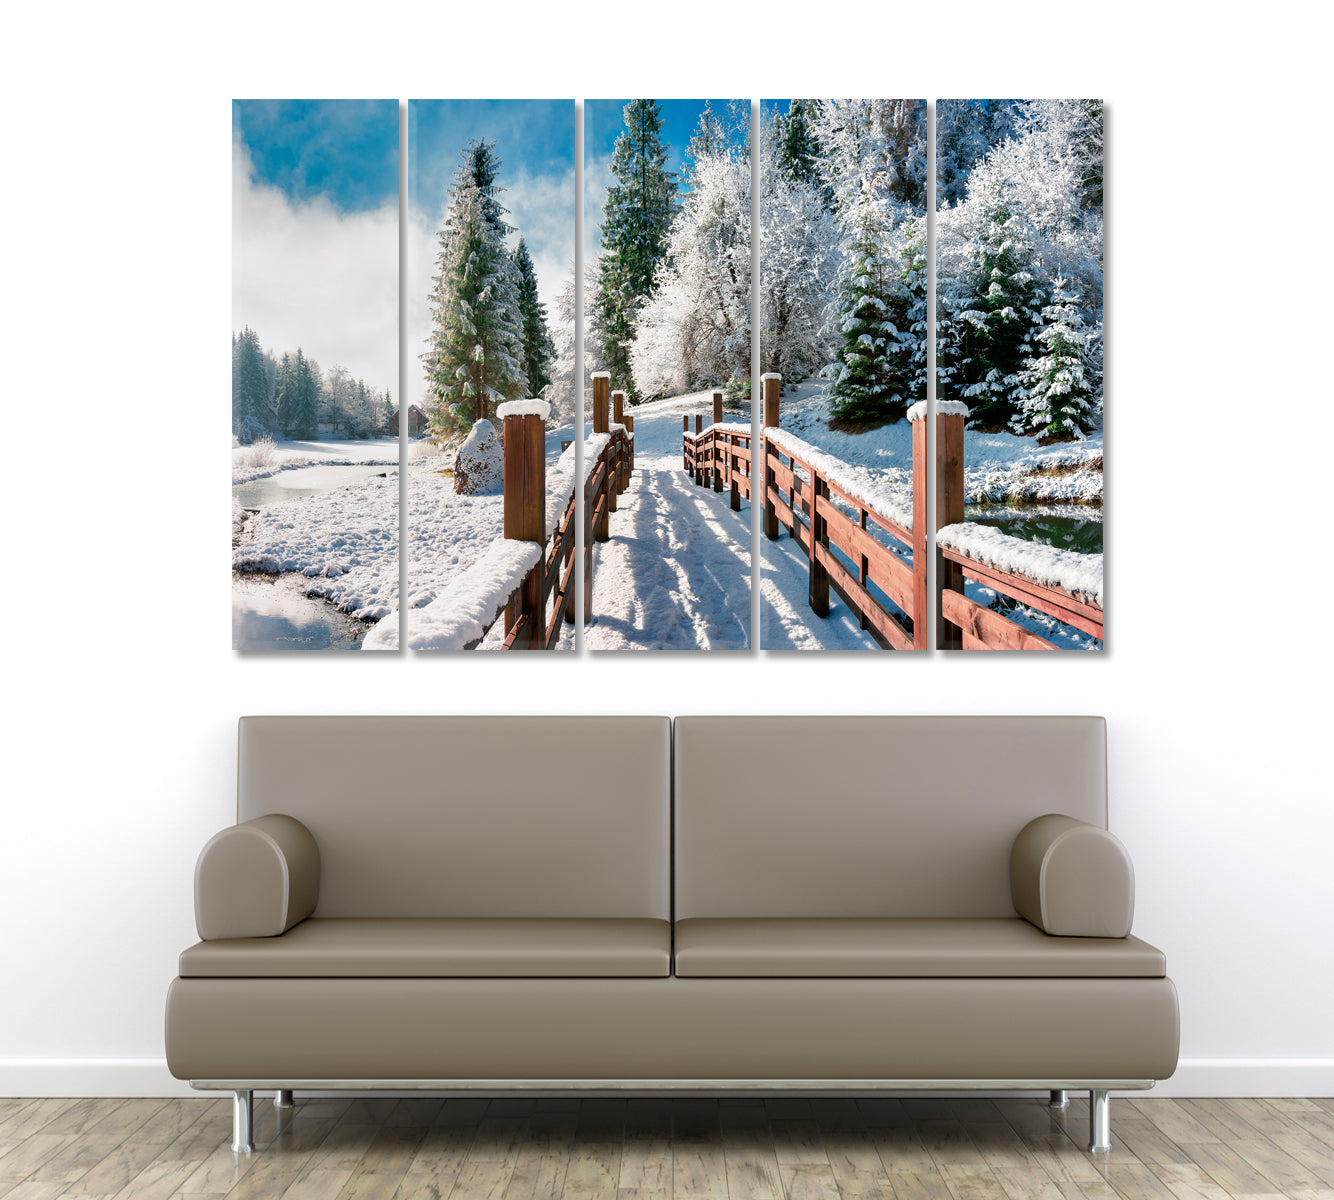 Snow Covered Christmas Trees Forest Bridge Panorama Scenery Landcape Artesty 5 panels 36" x 24" 